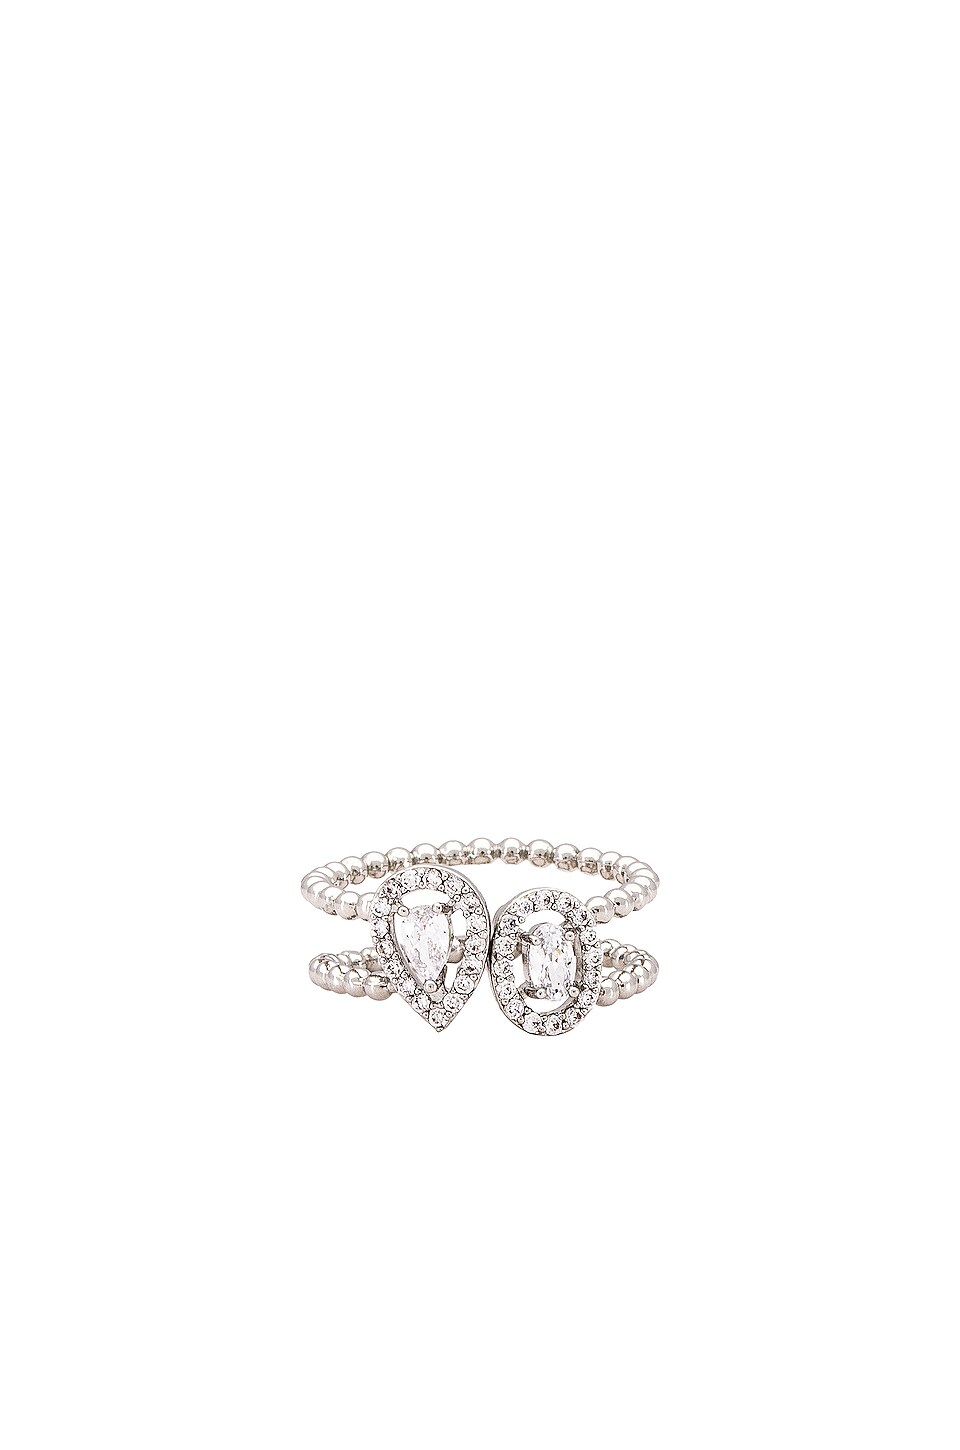 Revolve Women Accessories Jewelry Rings Said Yes Ring in Metallic Silver. 